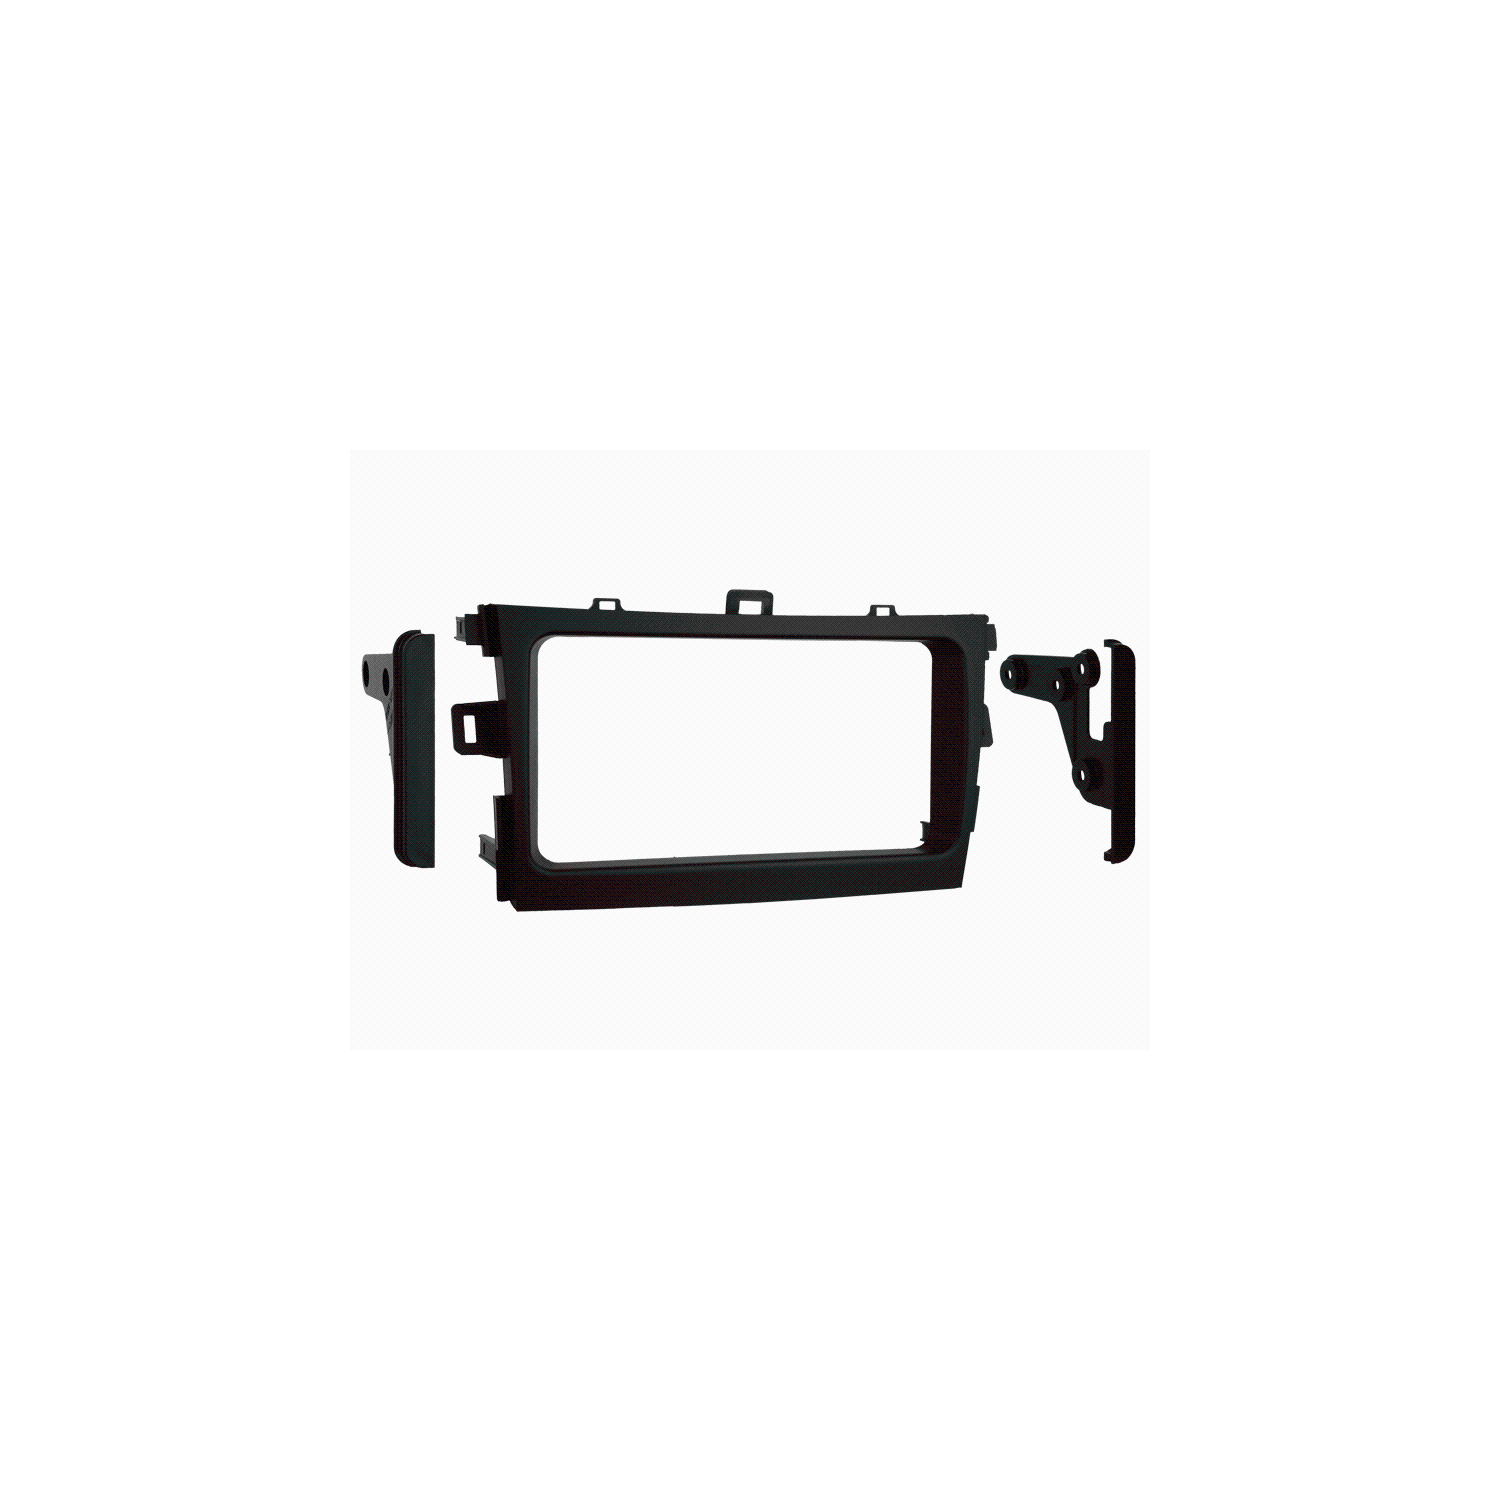 Metra 95-8223 Double DIN Installation Kit for 2009-up Toyota Corolla Vehicles